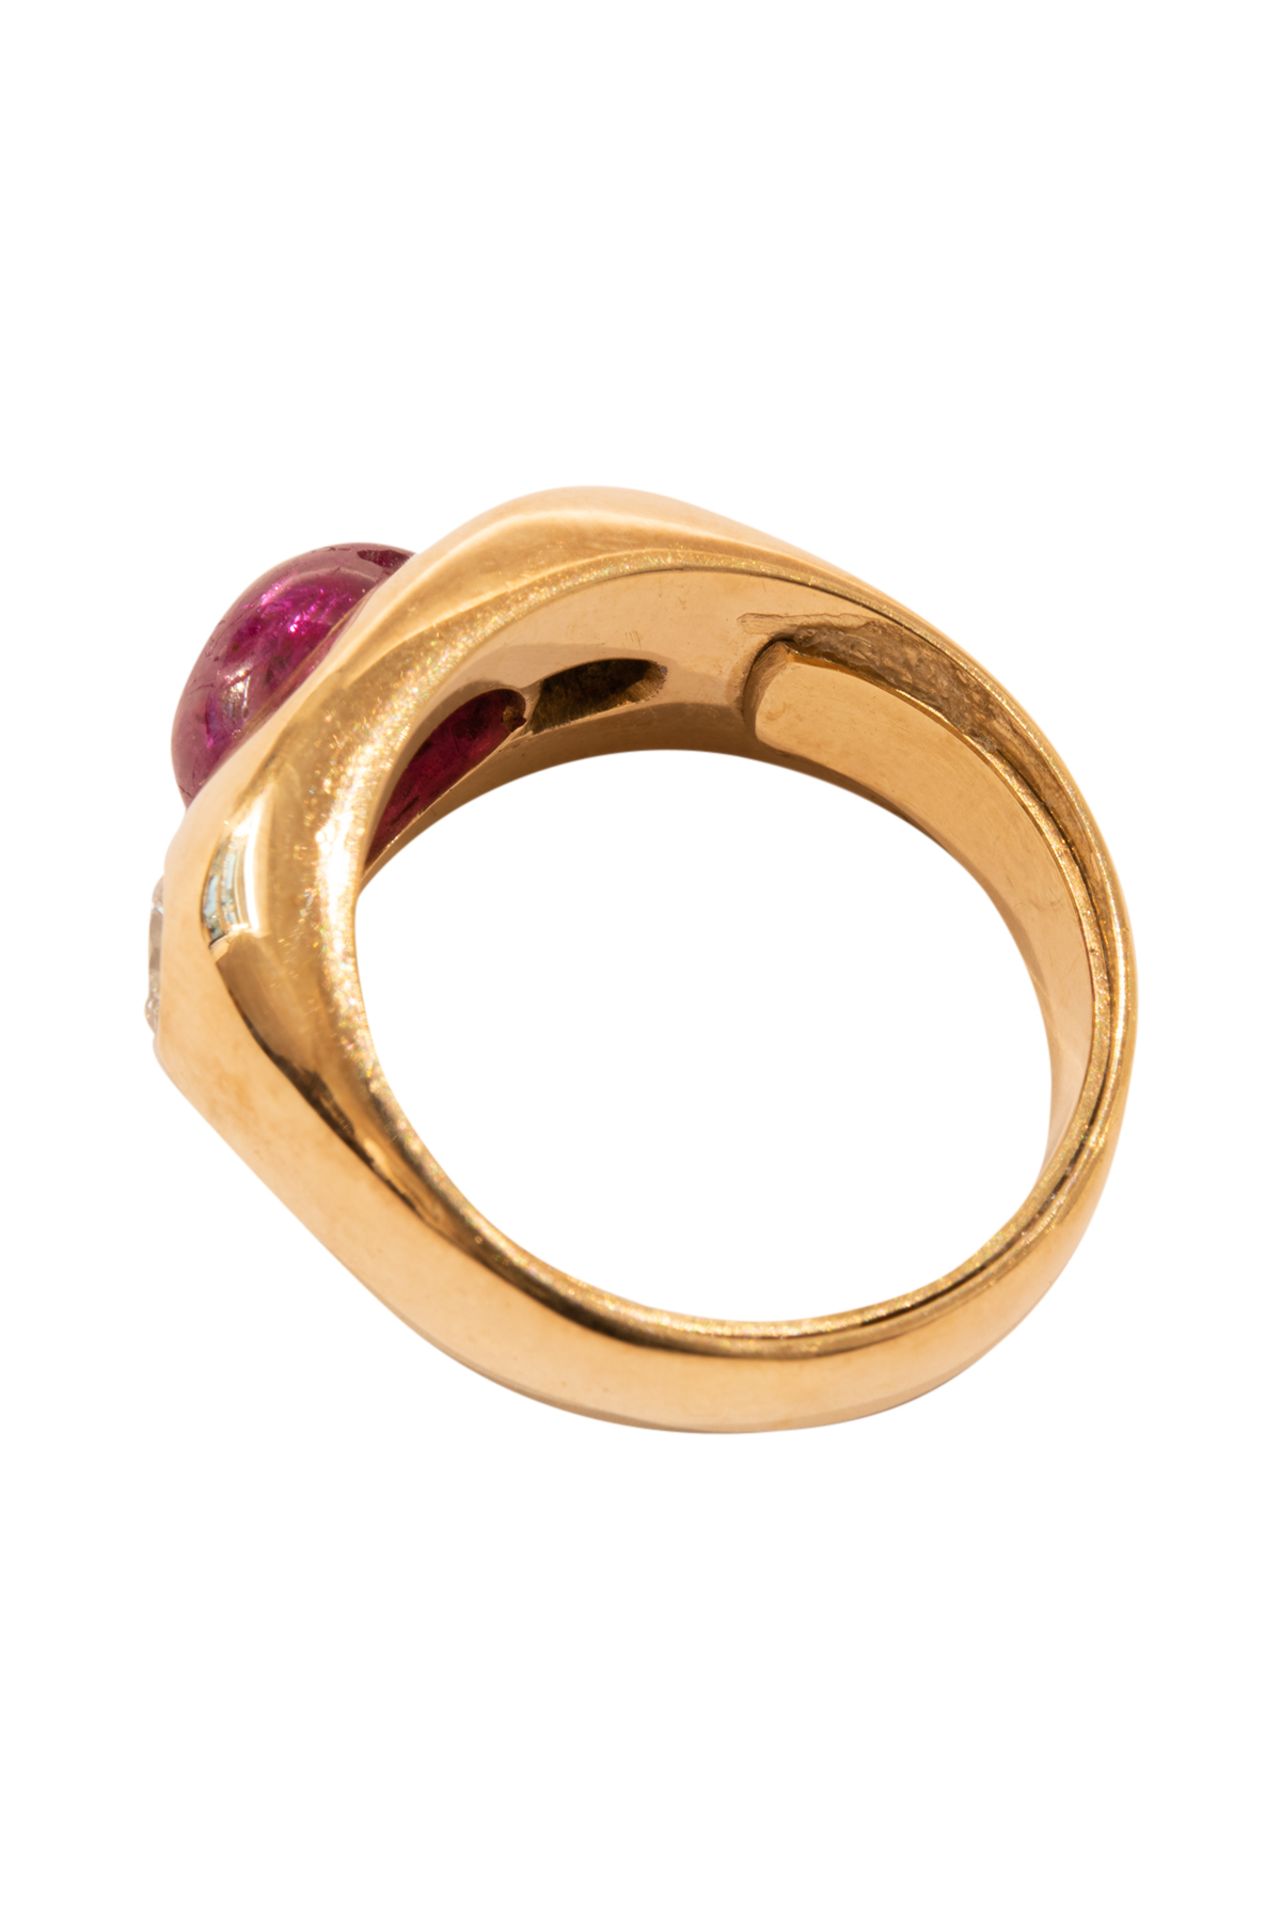 Ring with brilliant diamonds and ruby - Image 3 of 4